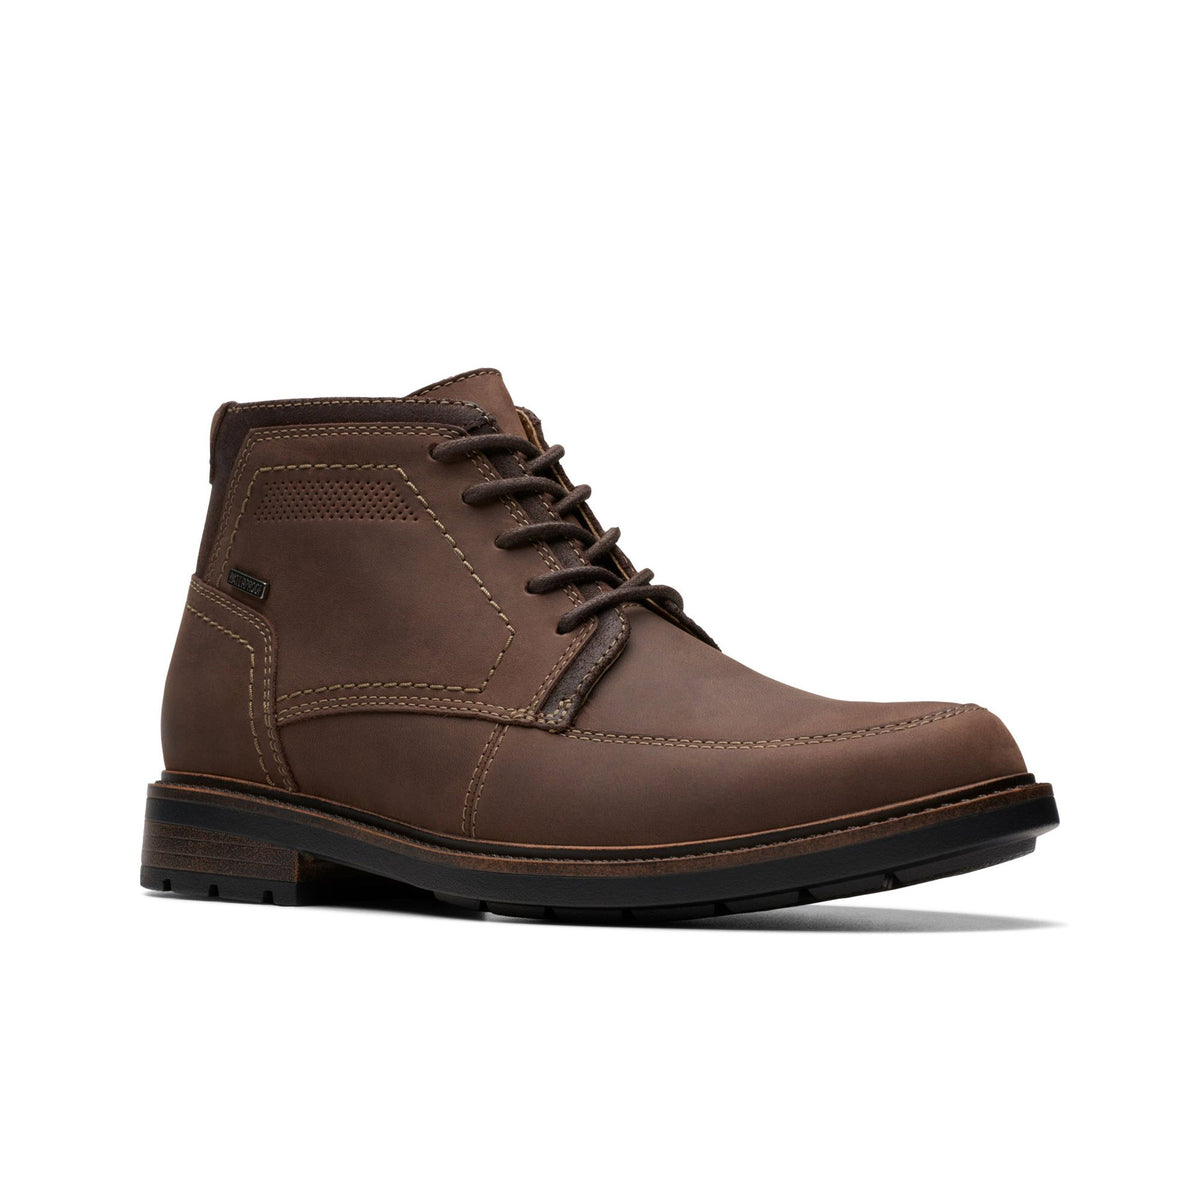 A Clarks Unshire Hi WP Dark Brown Leather boot with a low heel and stitched detailing, featuring Clark&#39;s comfort, isolated on a white background.